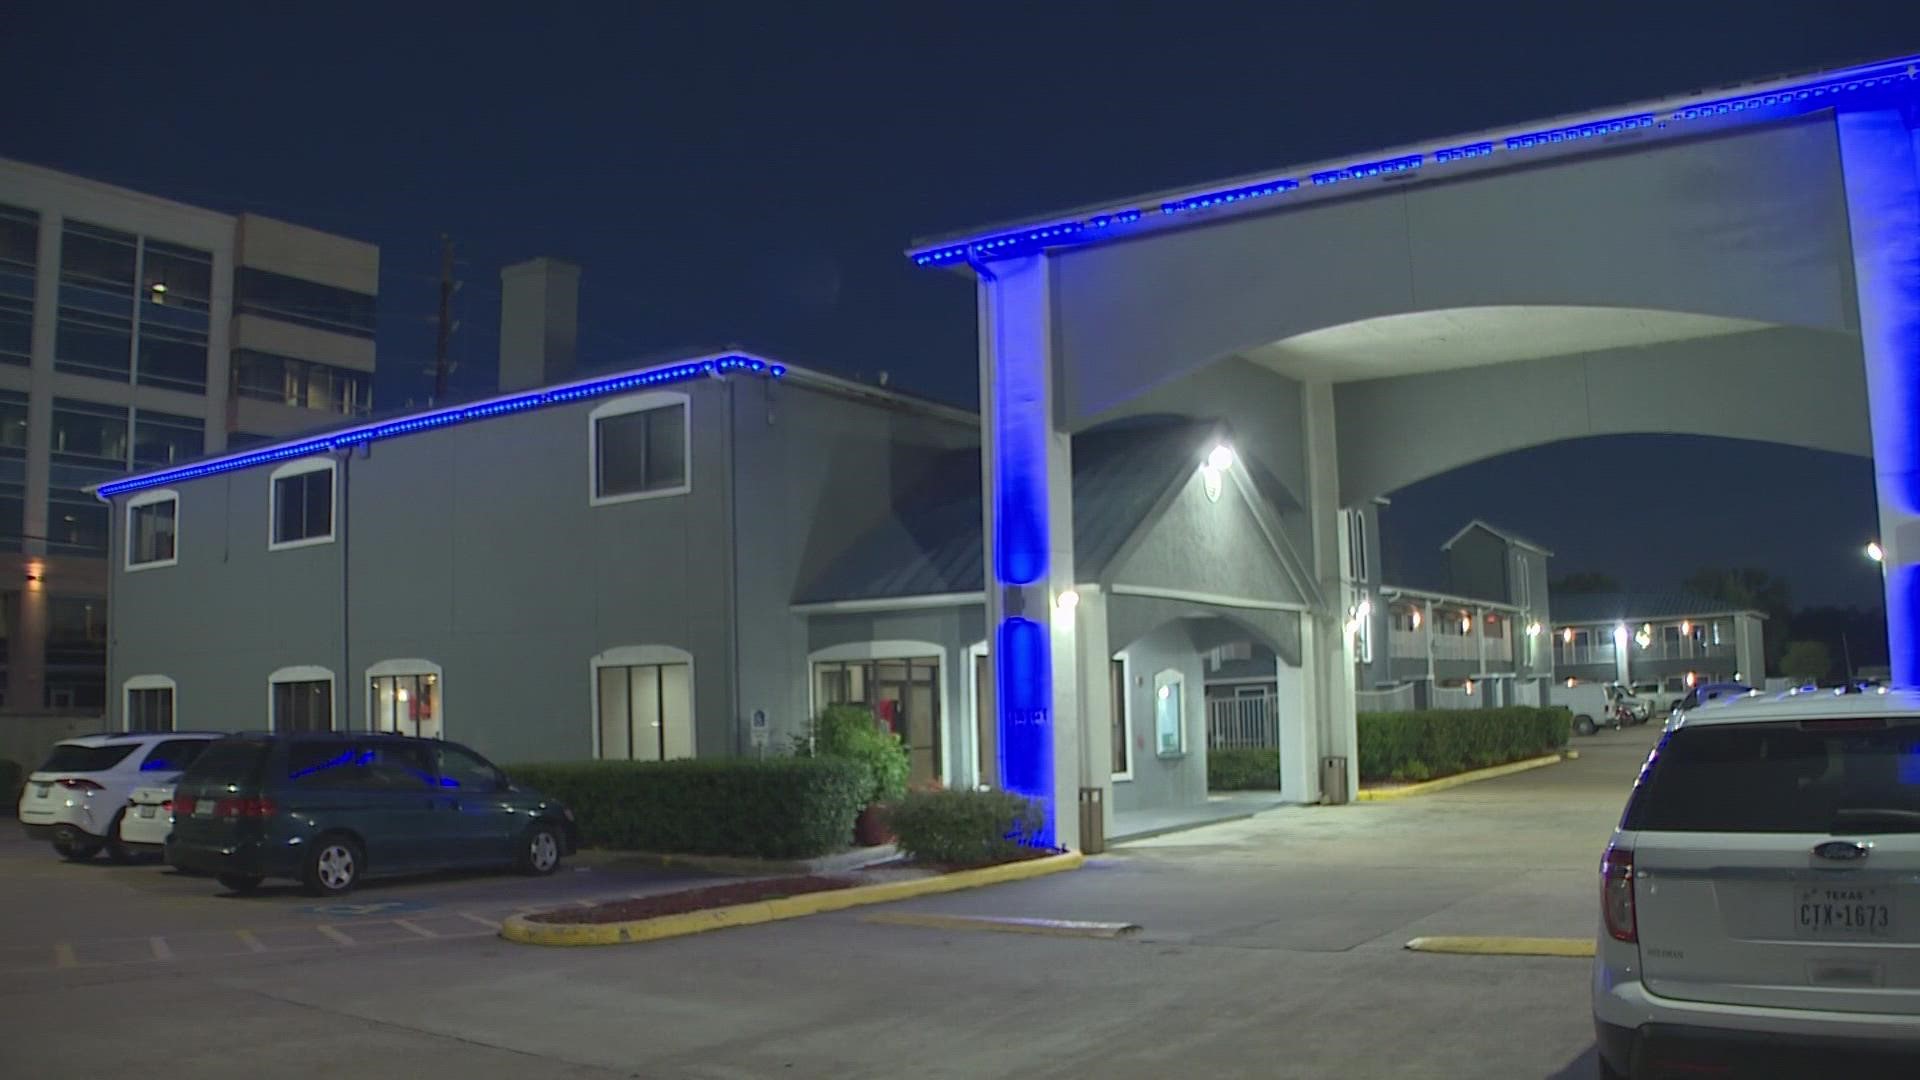 A child was found dead at a west Houston motel and a man and woman were detained at the scene, according to Houston police.